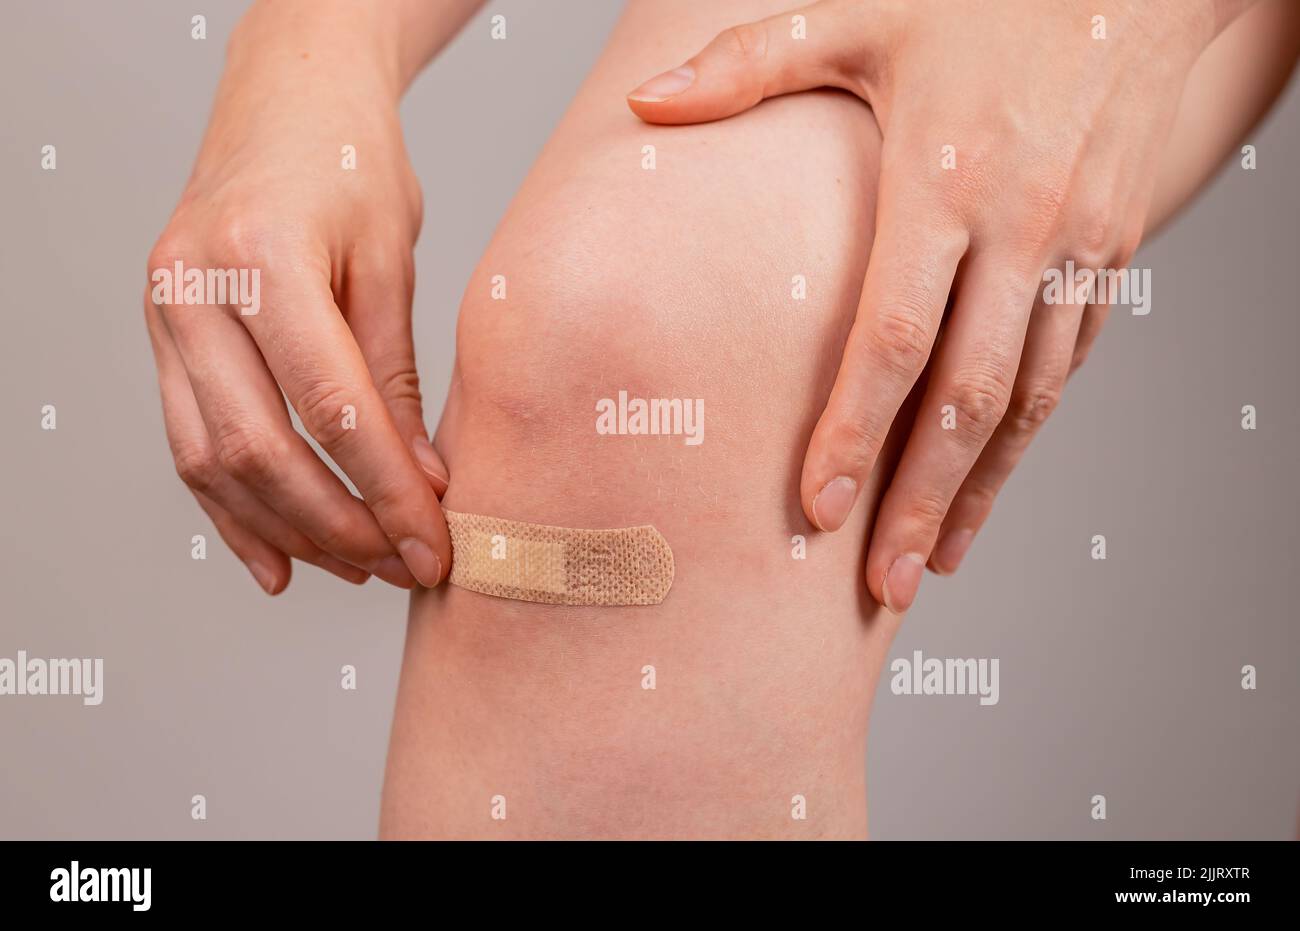 Woman applying medical plaster on knee. First aid concept. Cuts, abrasions and lightly bleeding wounds healing. Infection prevention. High quality photo Stock Photo